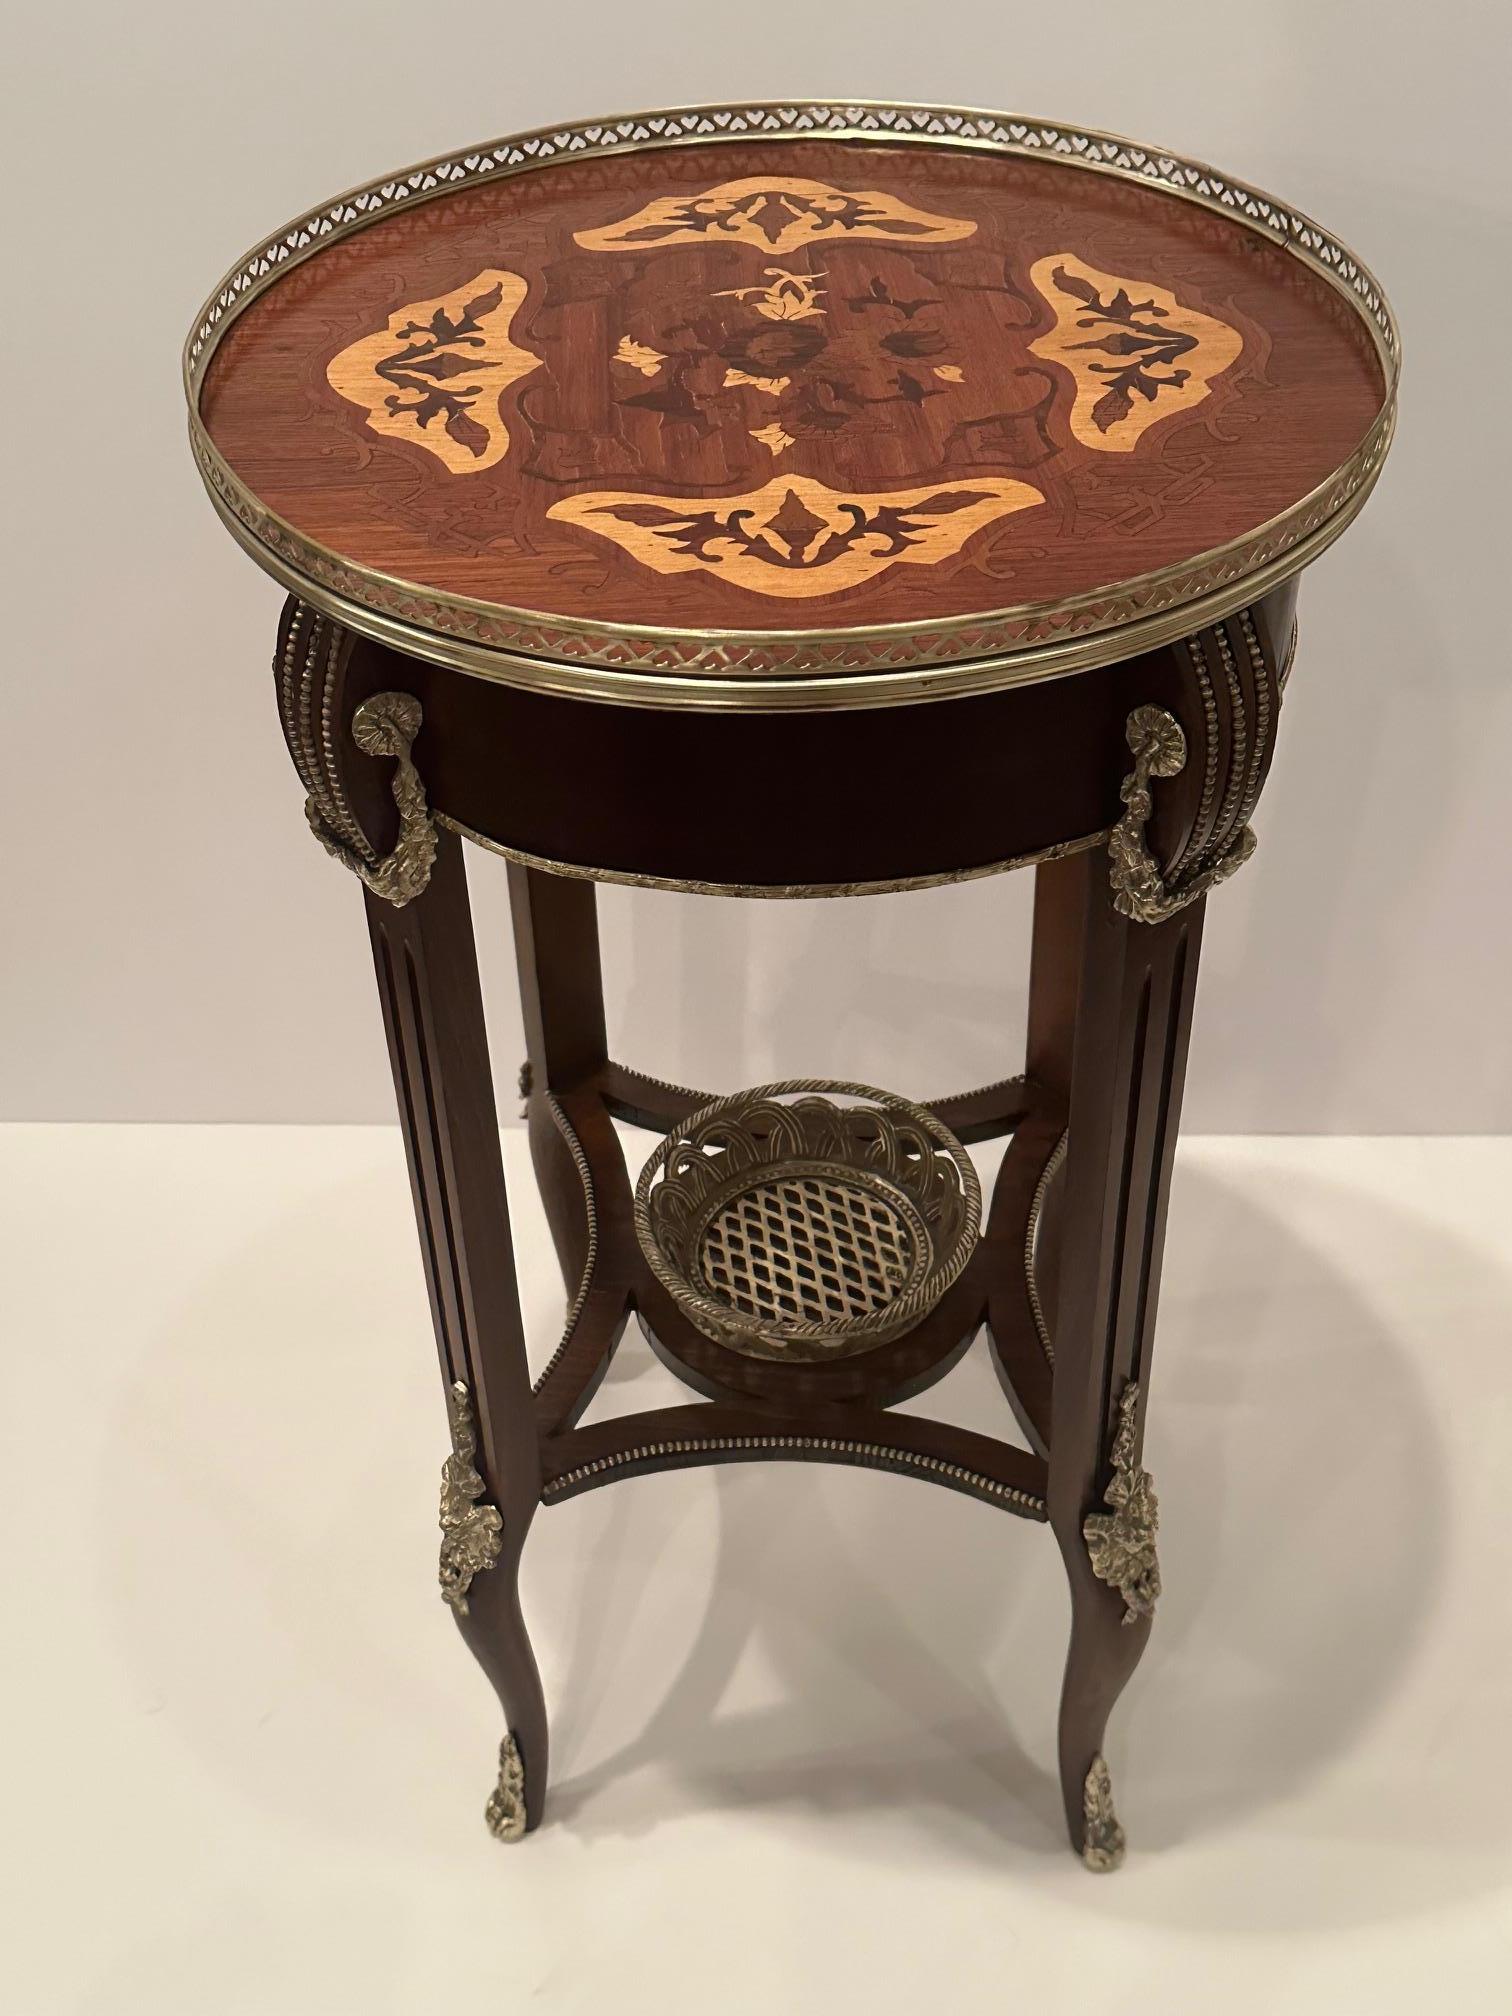 Italian Sumptuous Round Mahogany Inlaid Side Table with Bronze Mounts For Sale